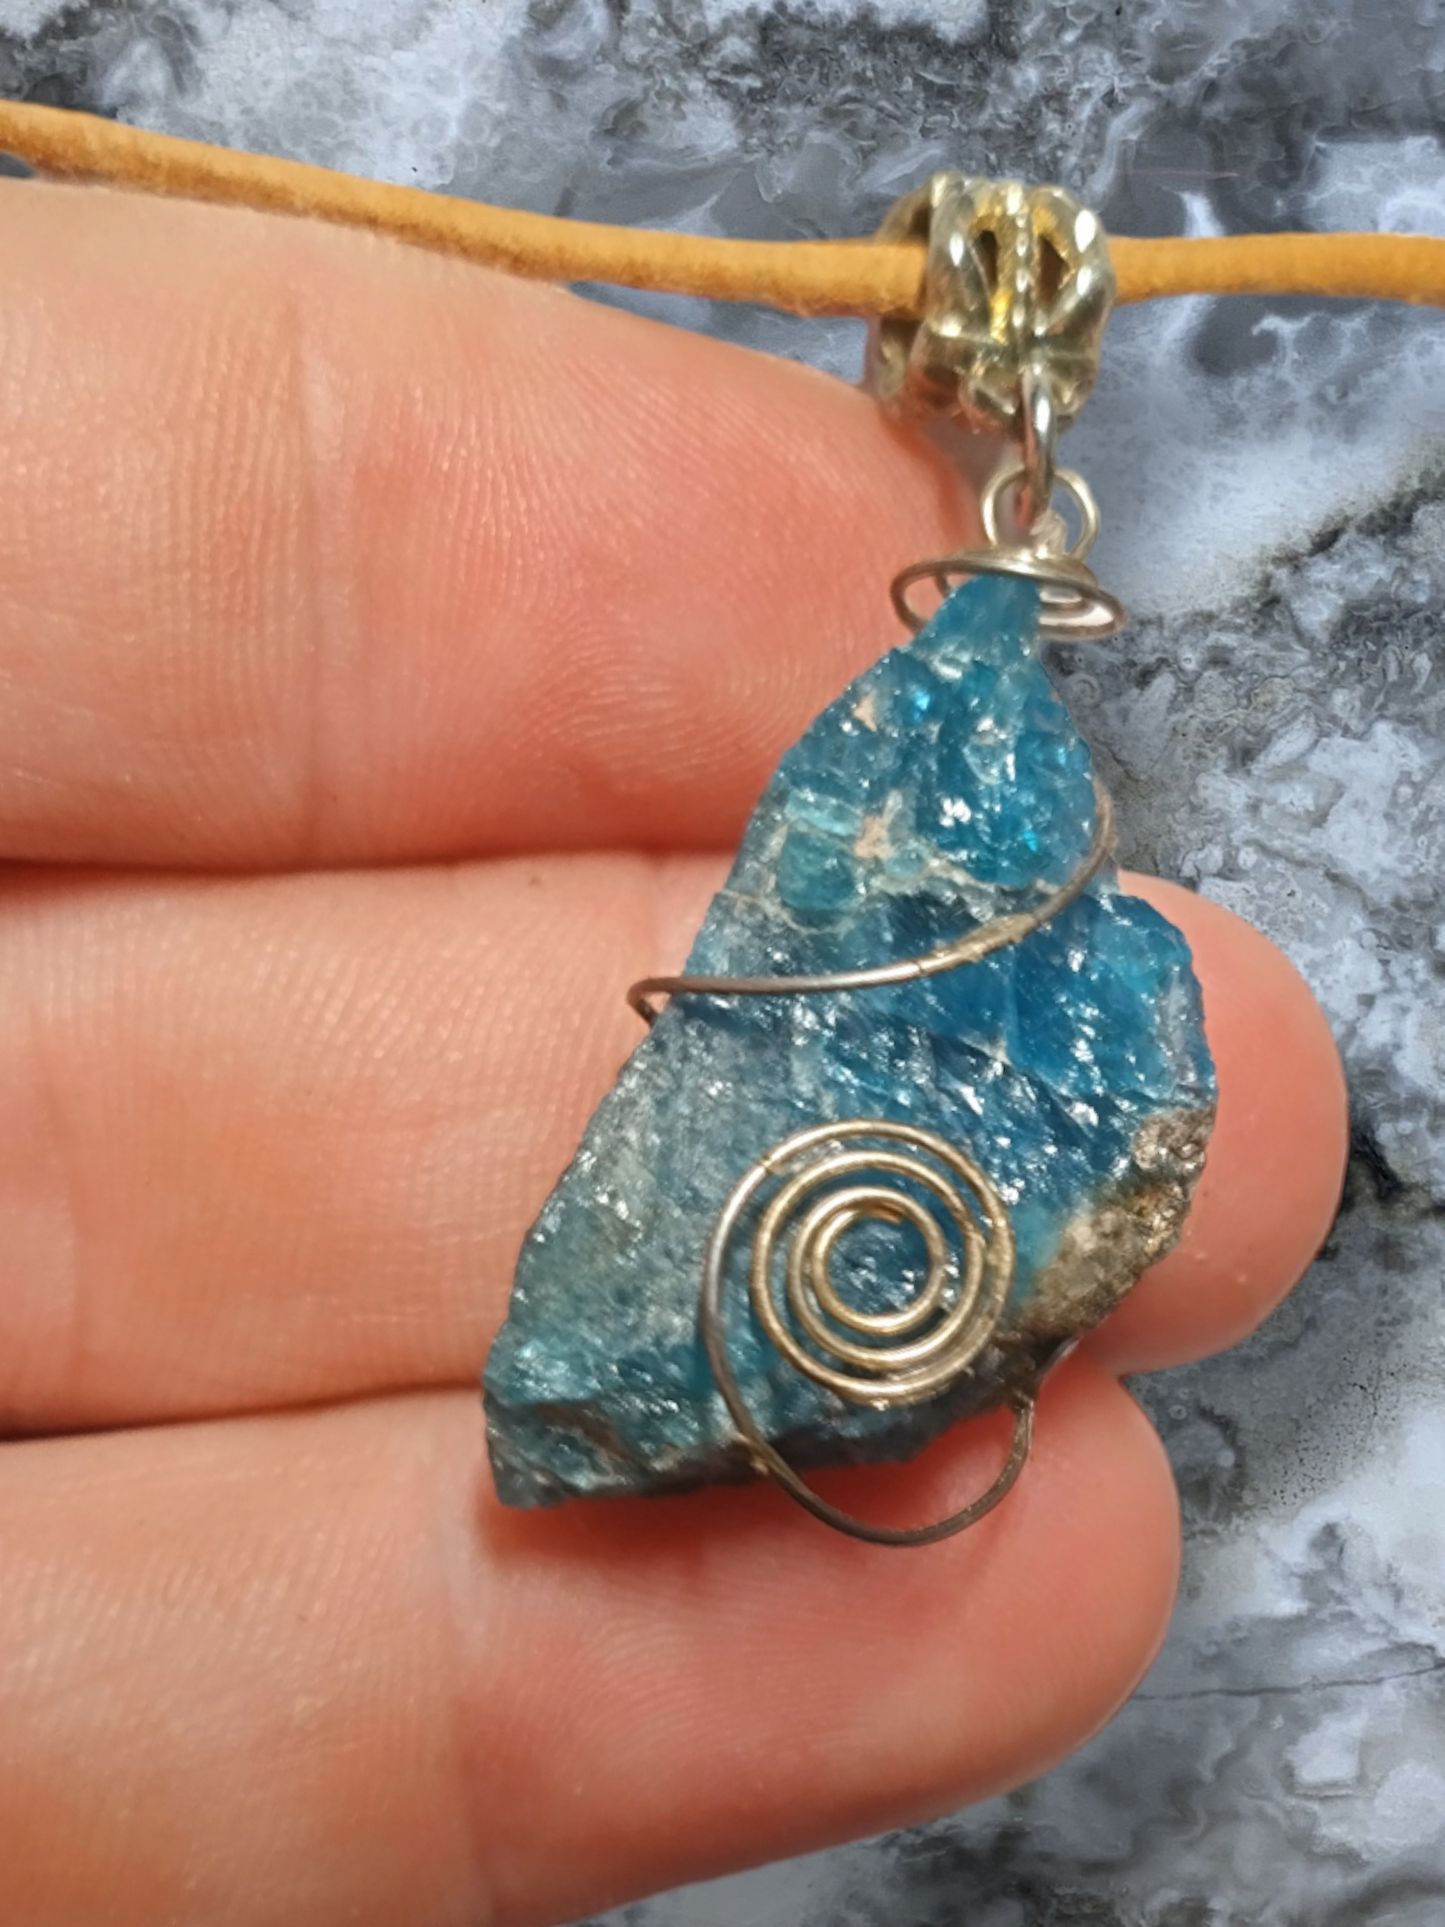 Apatite Crystal wrapped pendant on an adjustable leather cord necklace.